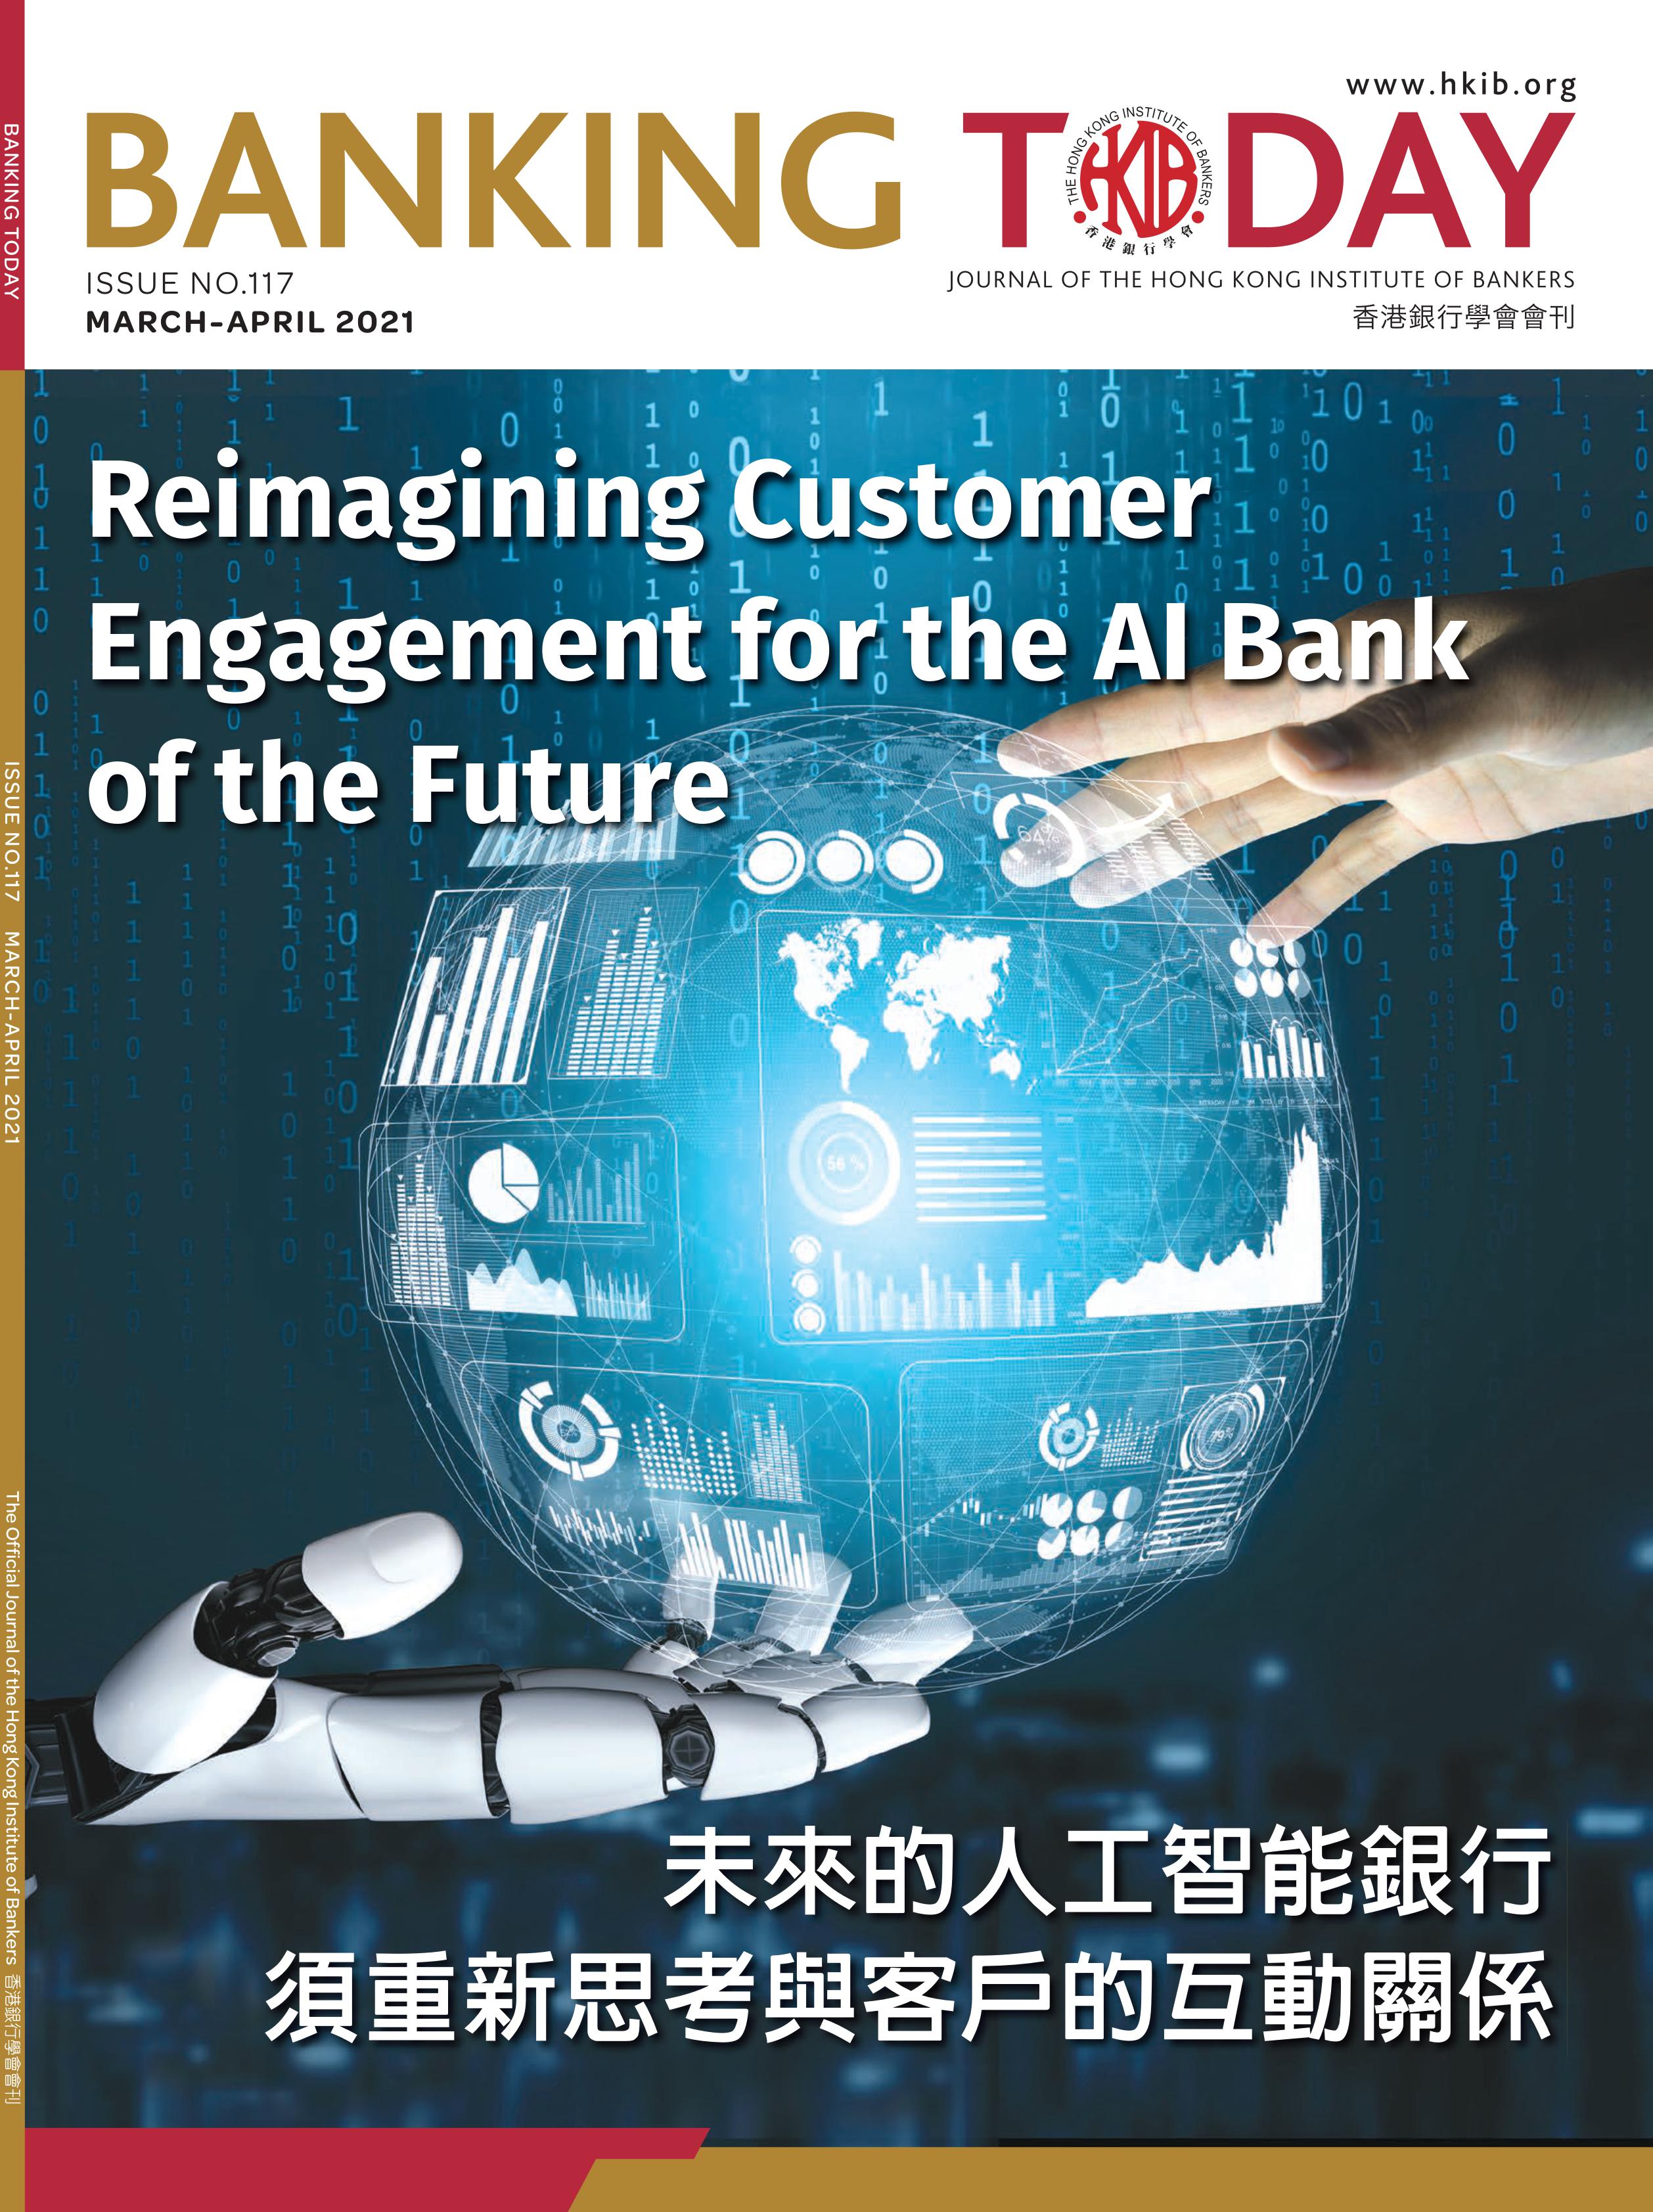 Reimagining Customer Engagement for the AI Bank of the Future